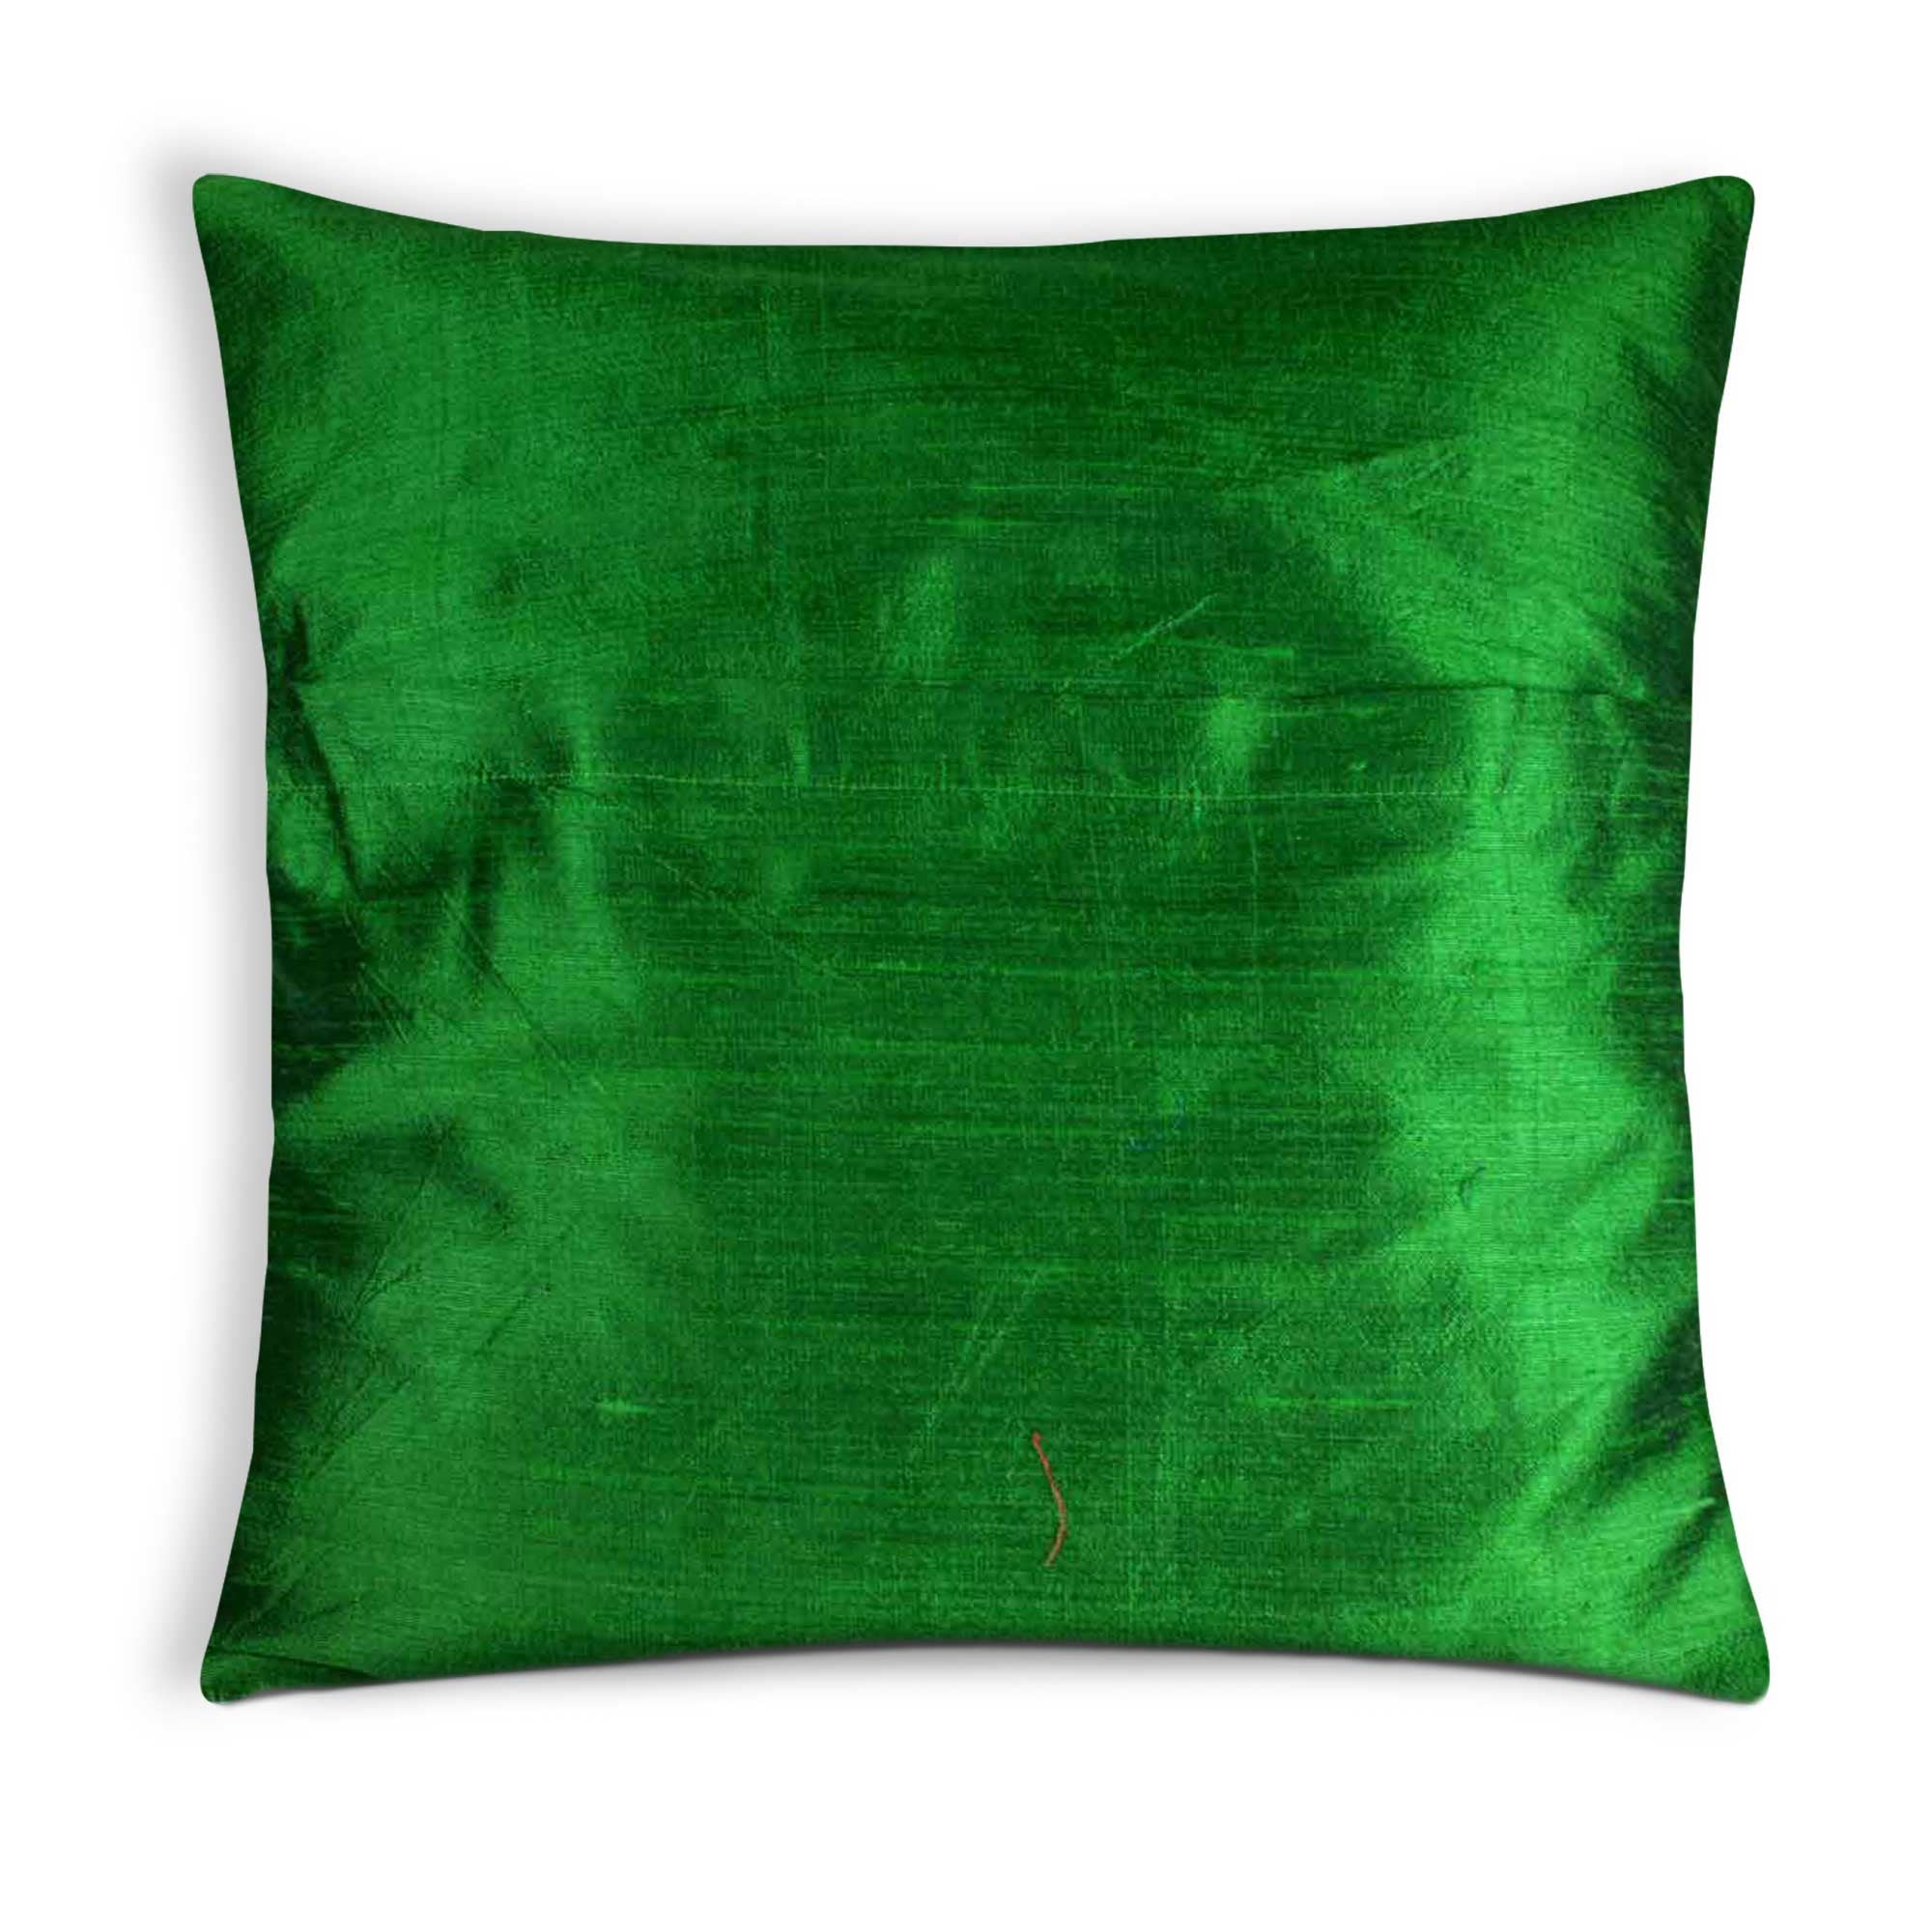 Emerald green silk pillow cover buy online from DesiCrafts